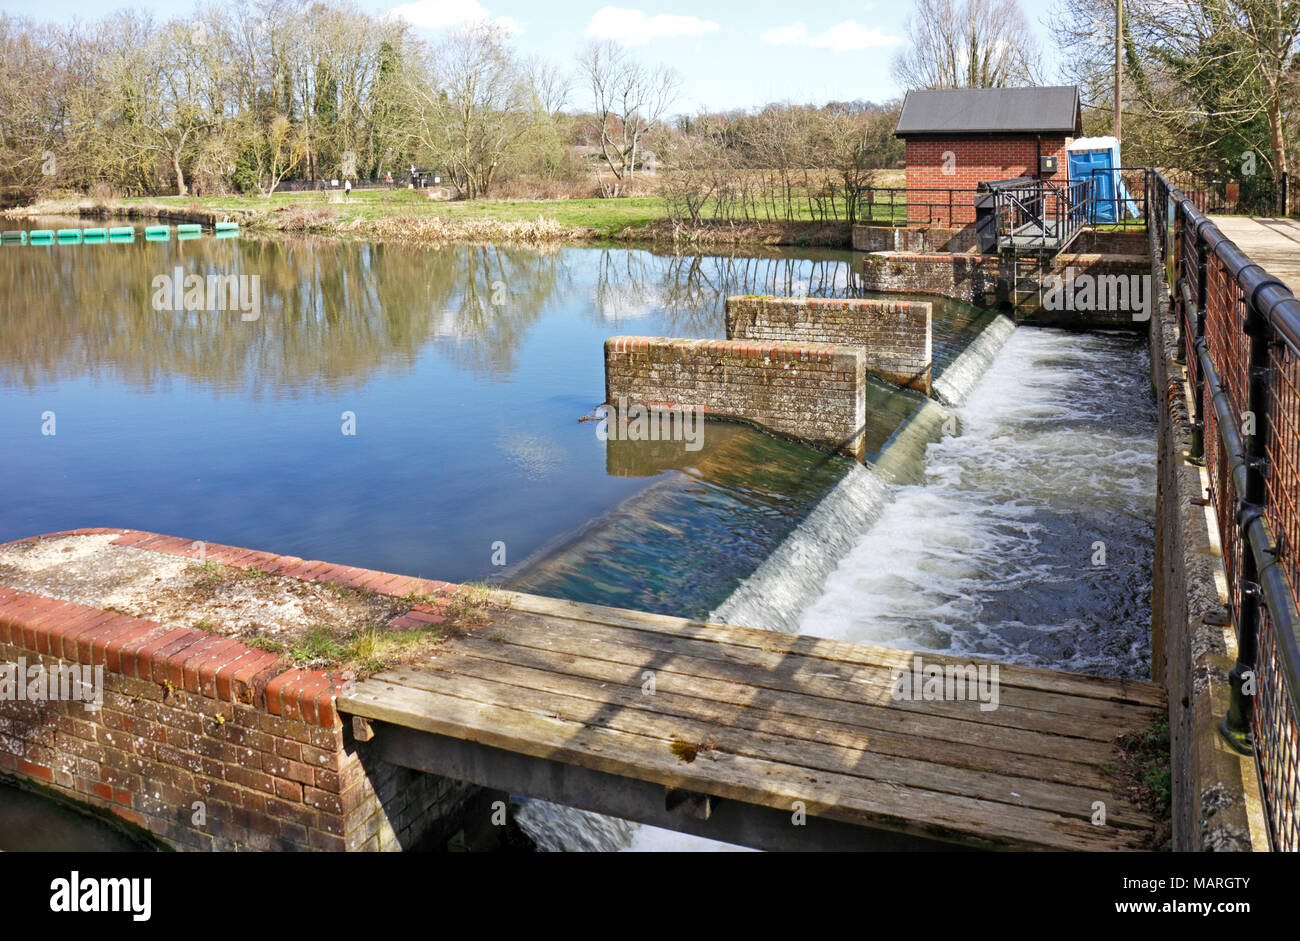 A view of the River Bure entering the remains of the former watermill at Horstead, Norfolk, England, United Kingdom, Europe. Stock Photo